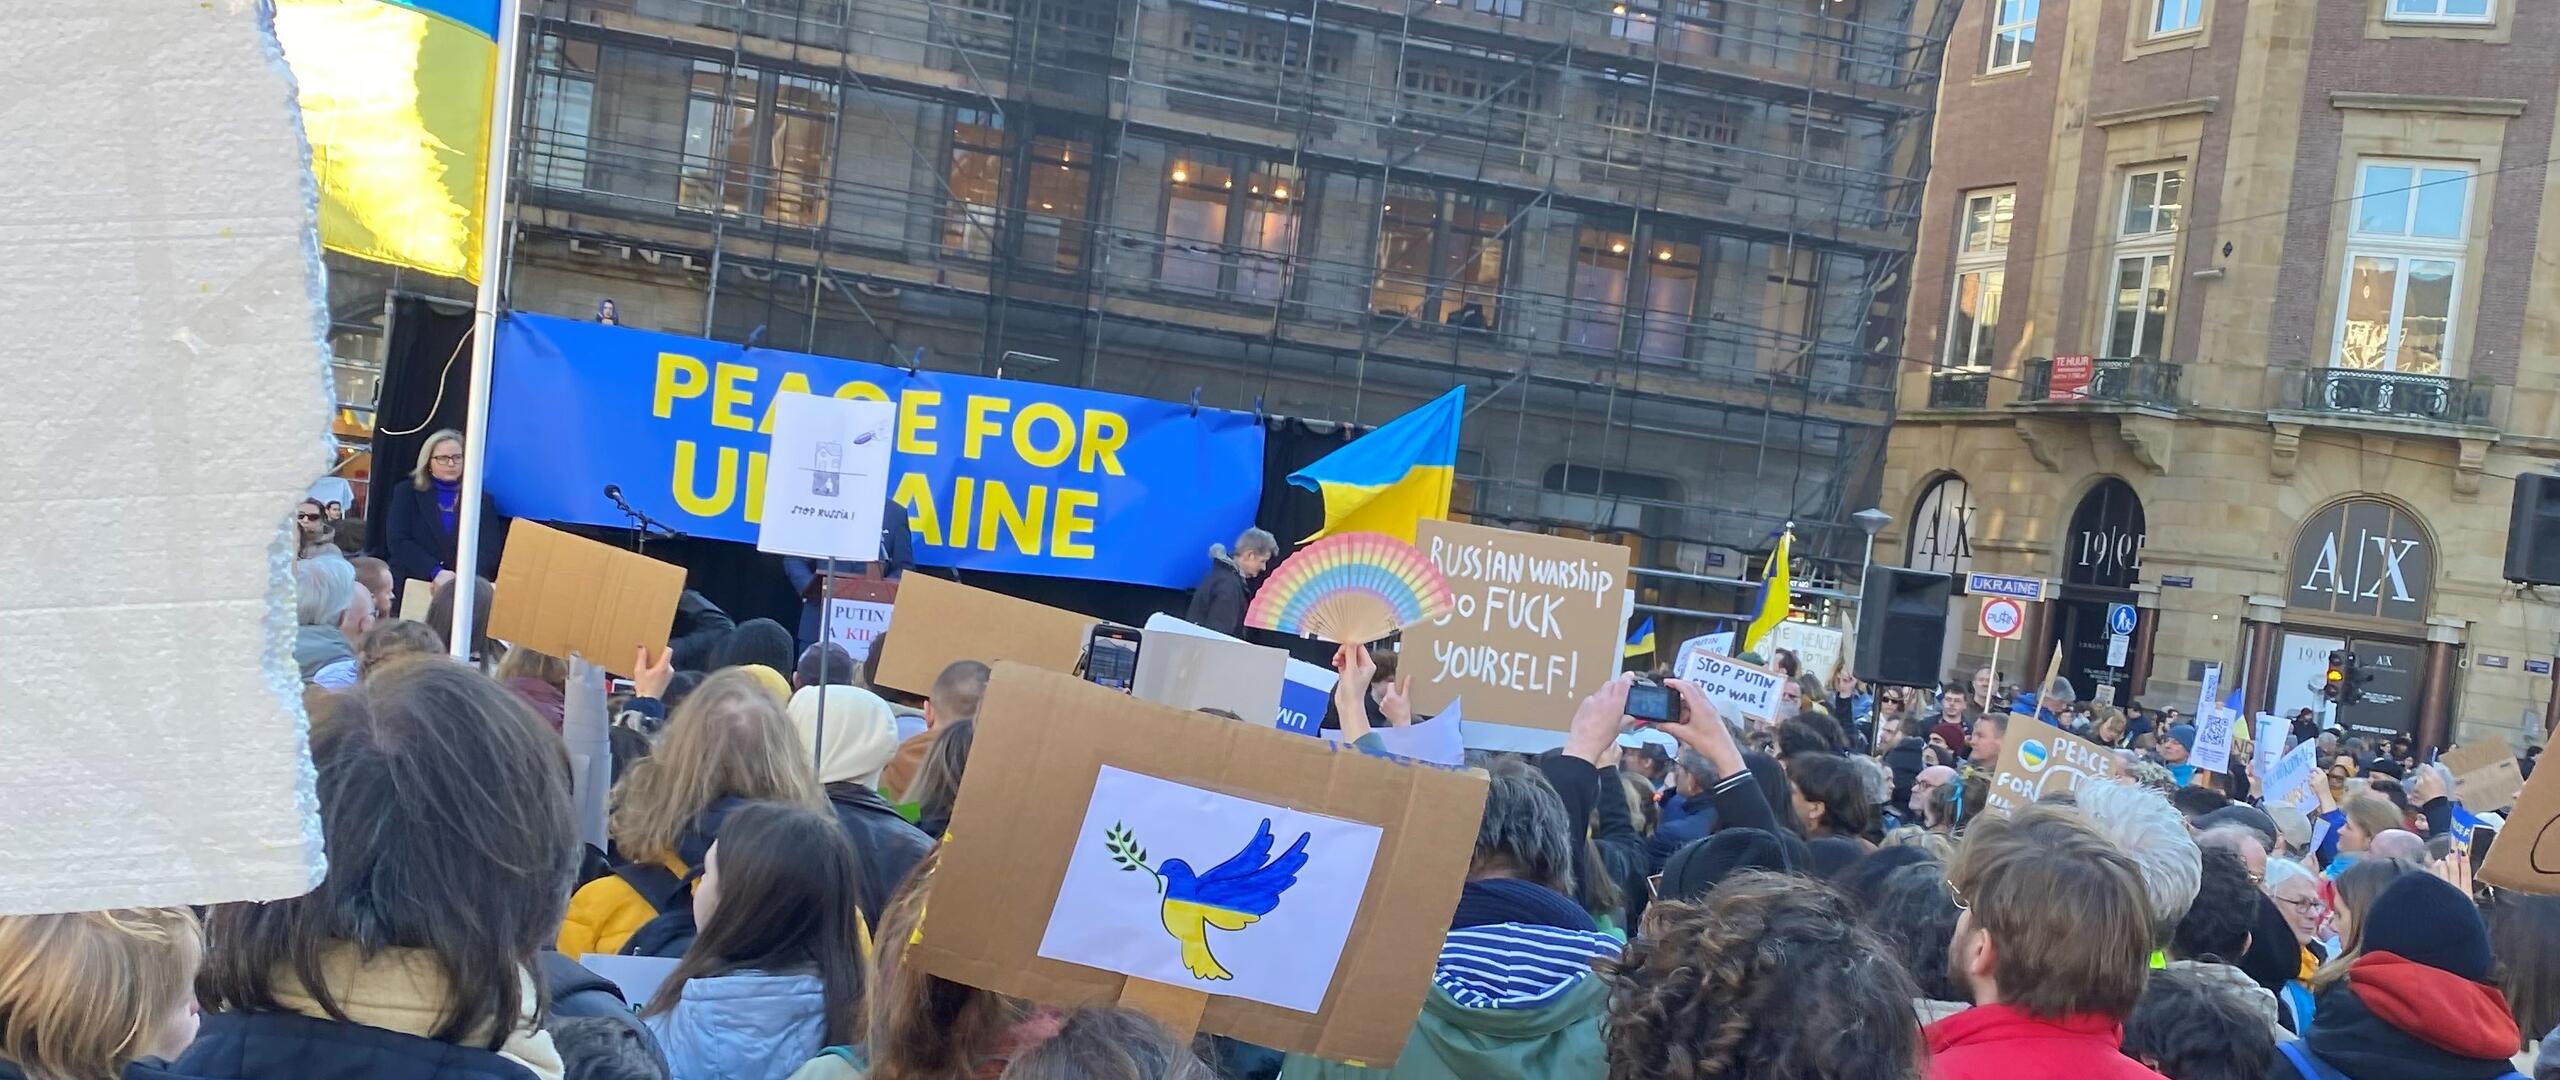 A rally in Amsterdam where the protesters urge for peace in Ukraine